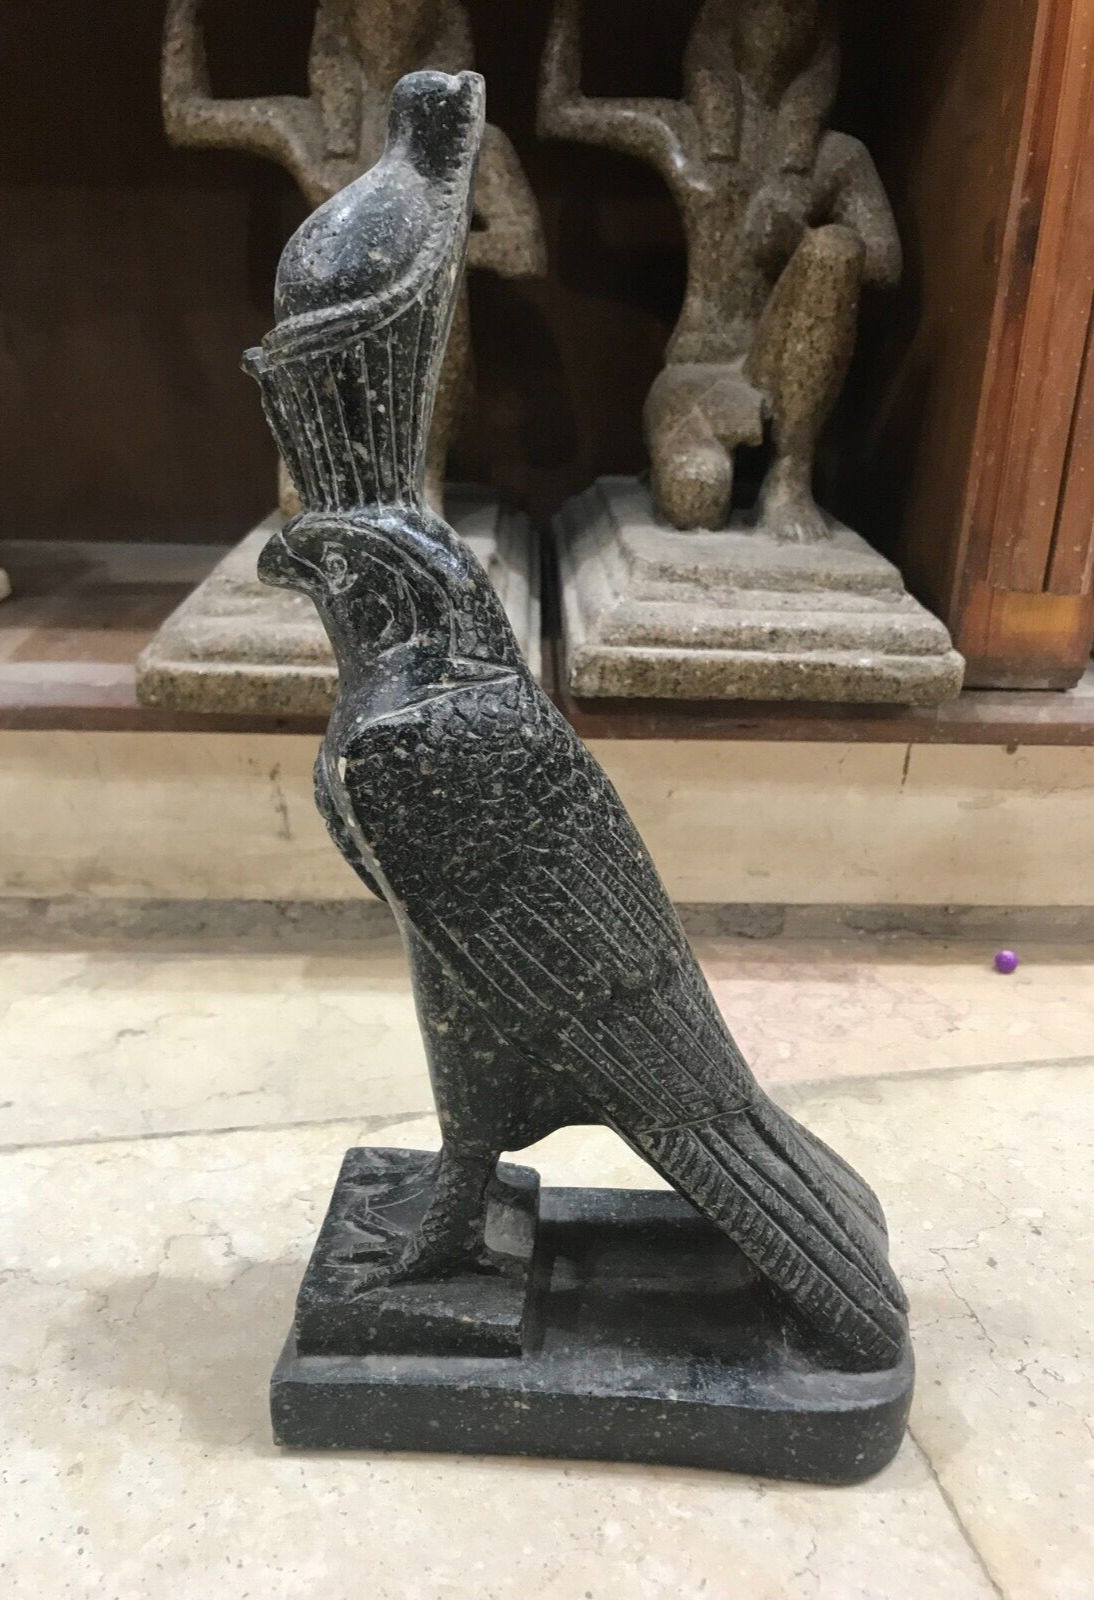 An ancient statue of the god Horus, heavy with a crown made of solid material